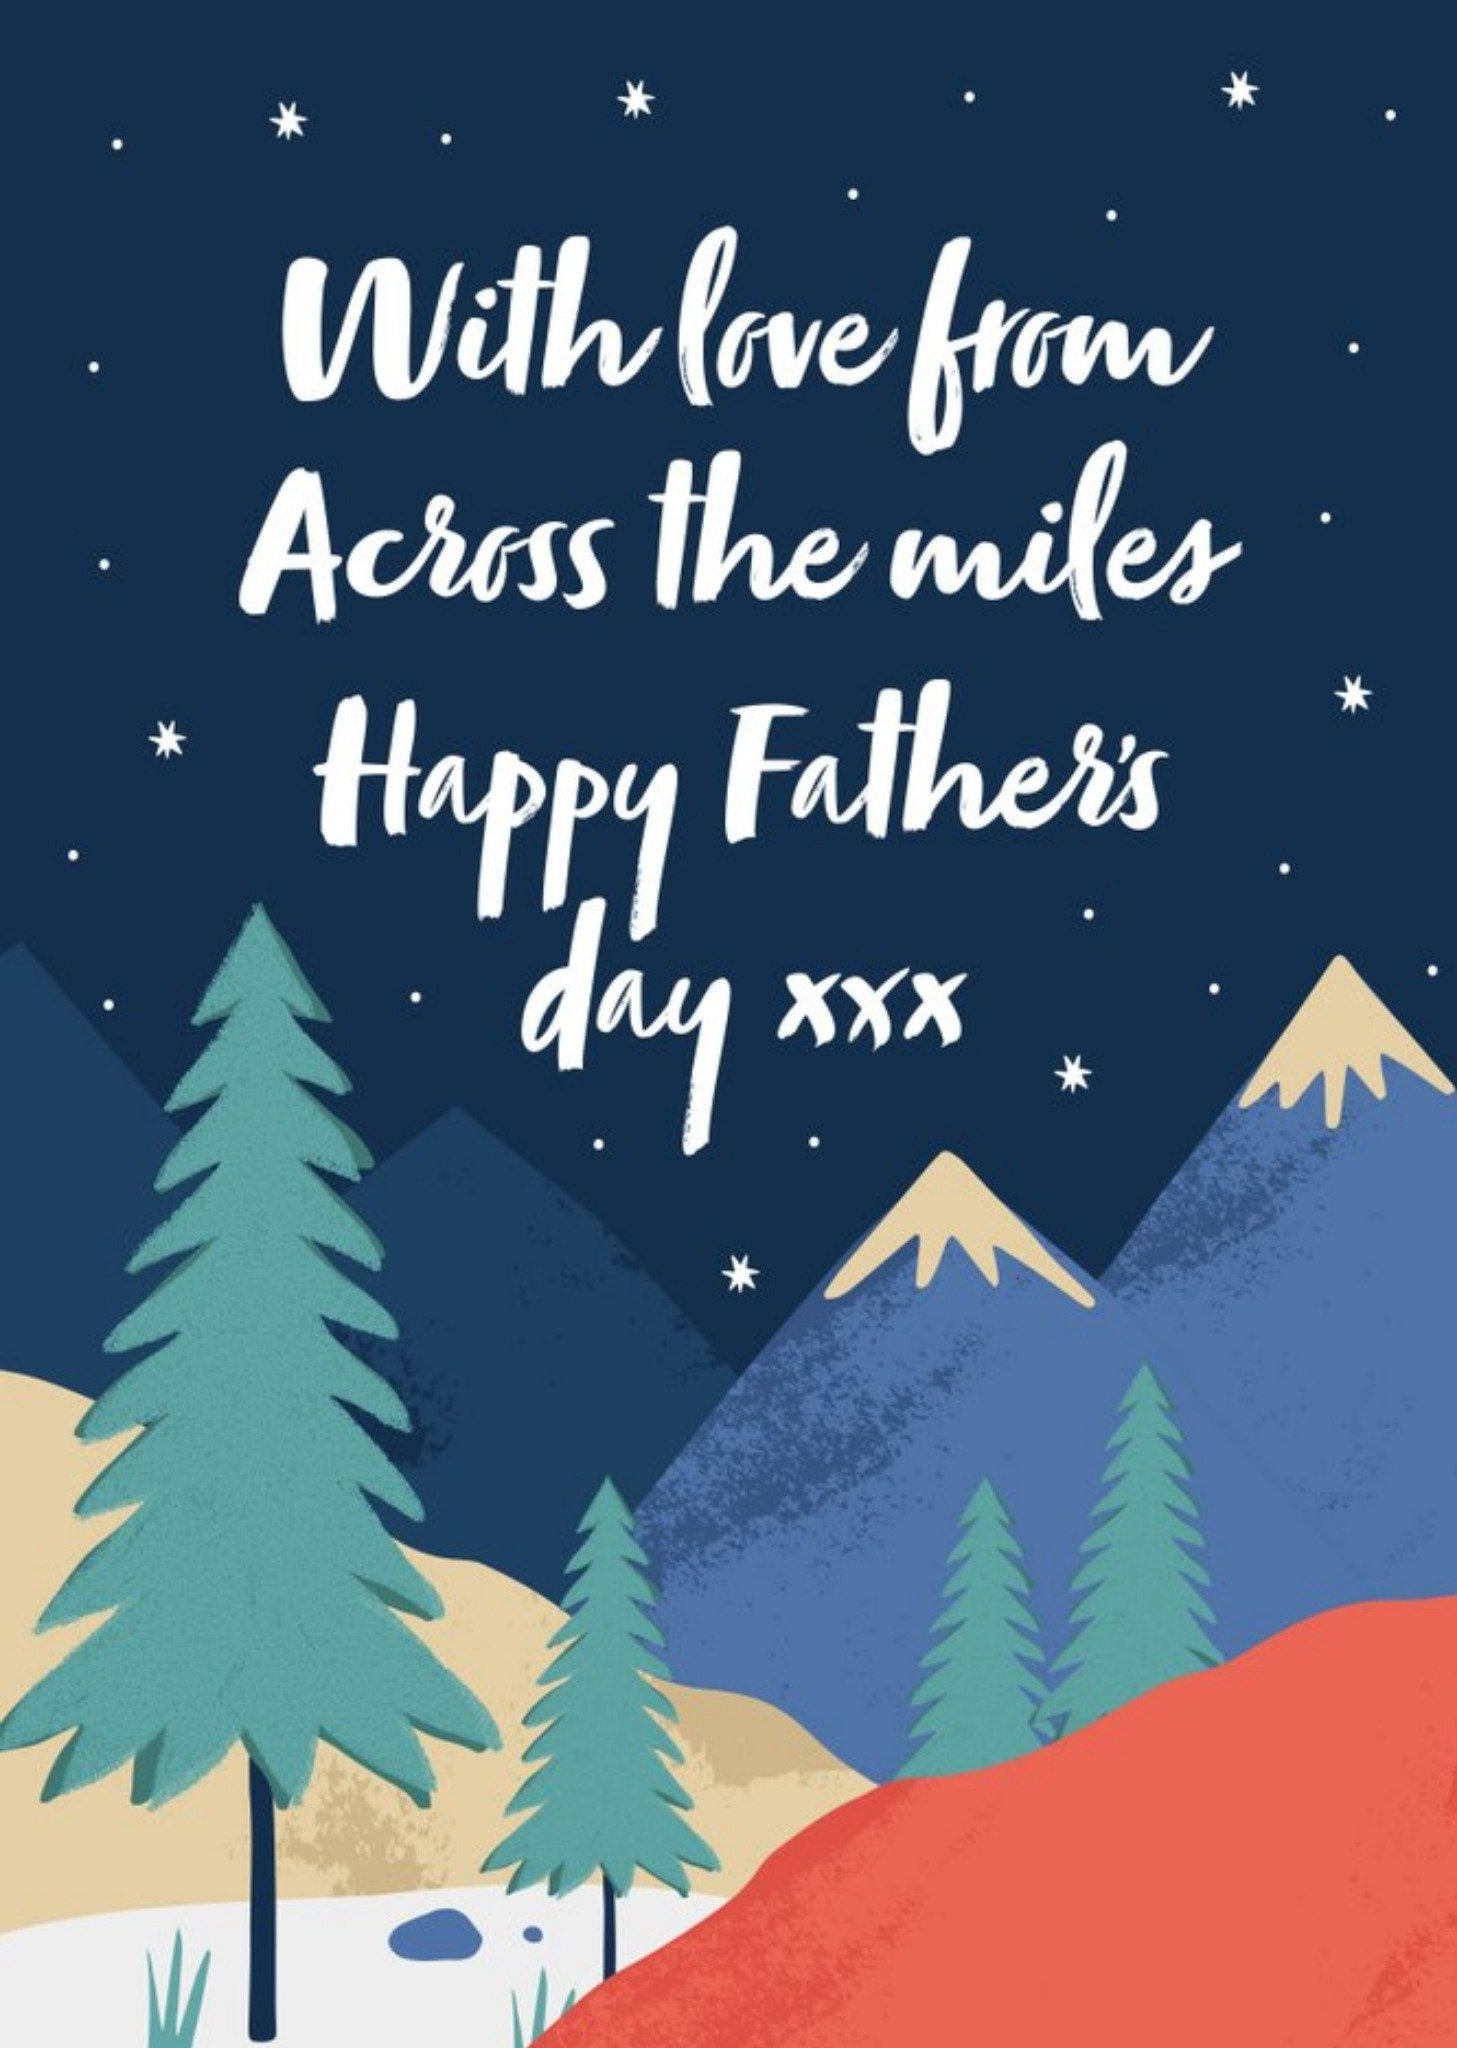 Moonpig Landscape With Love From Across The Miles Happy Father's Day Card Ecard